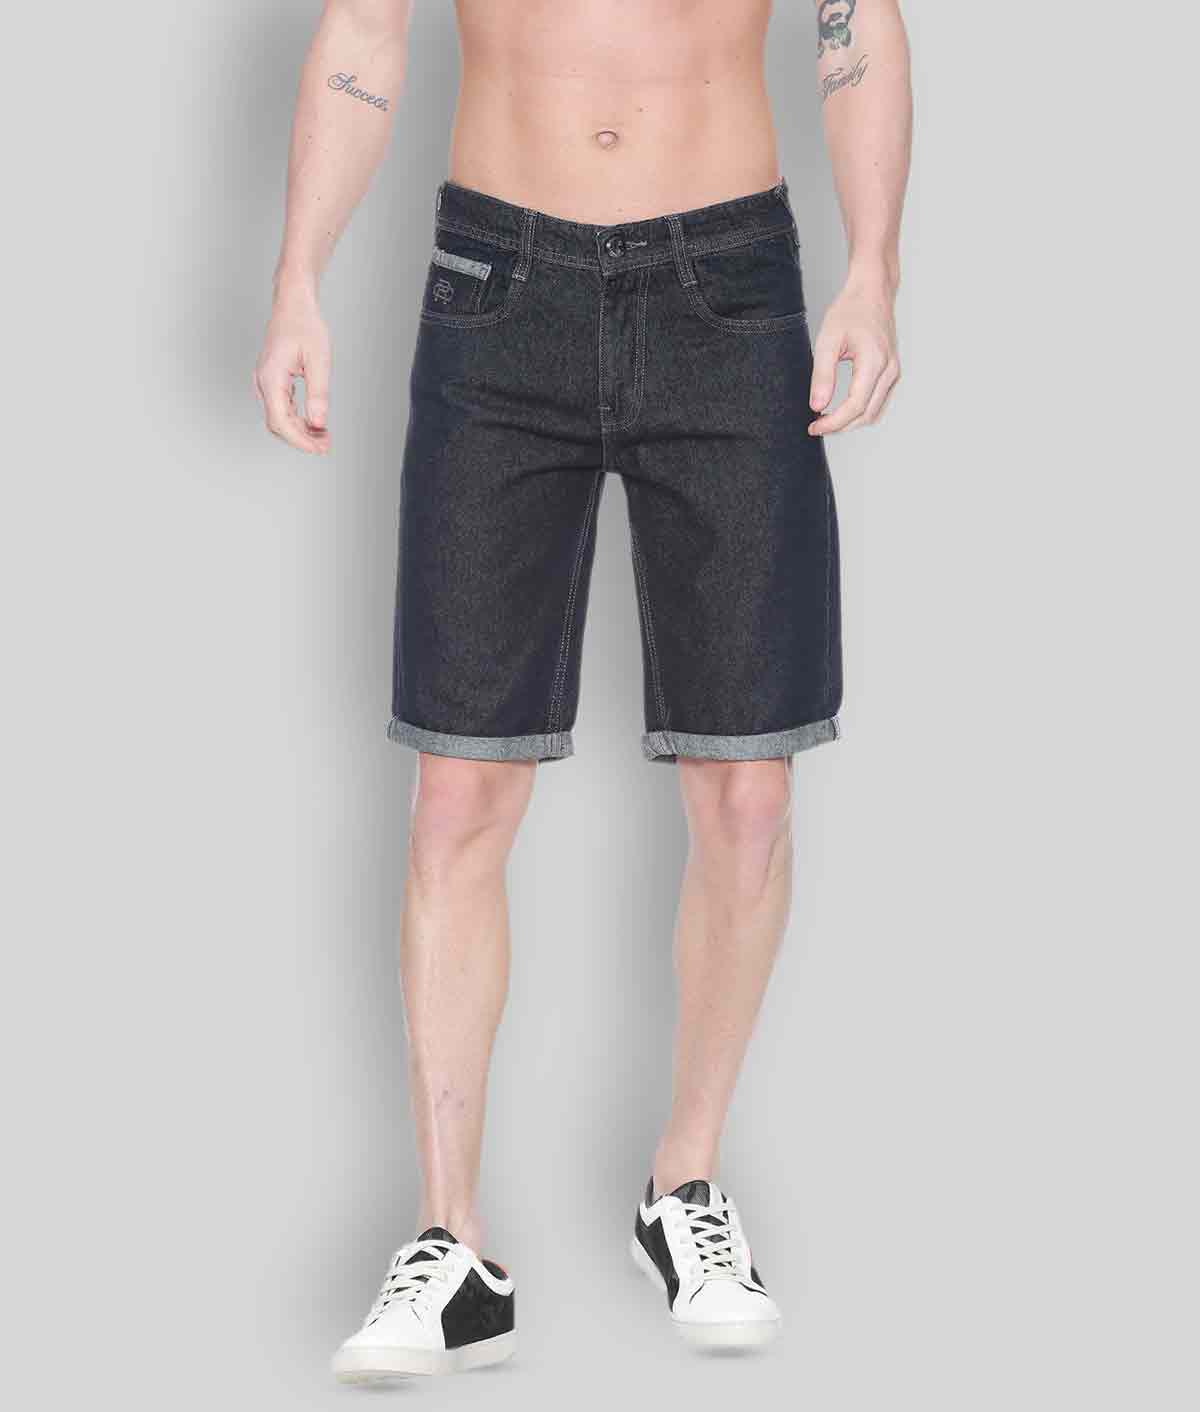 Raa Jeans -  Black 100% Cotton Men's Shorts ( Pack of 1 )